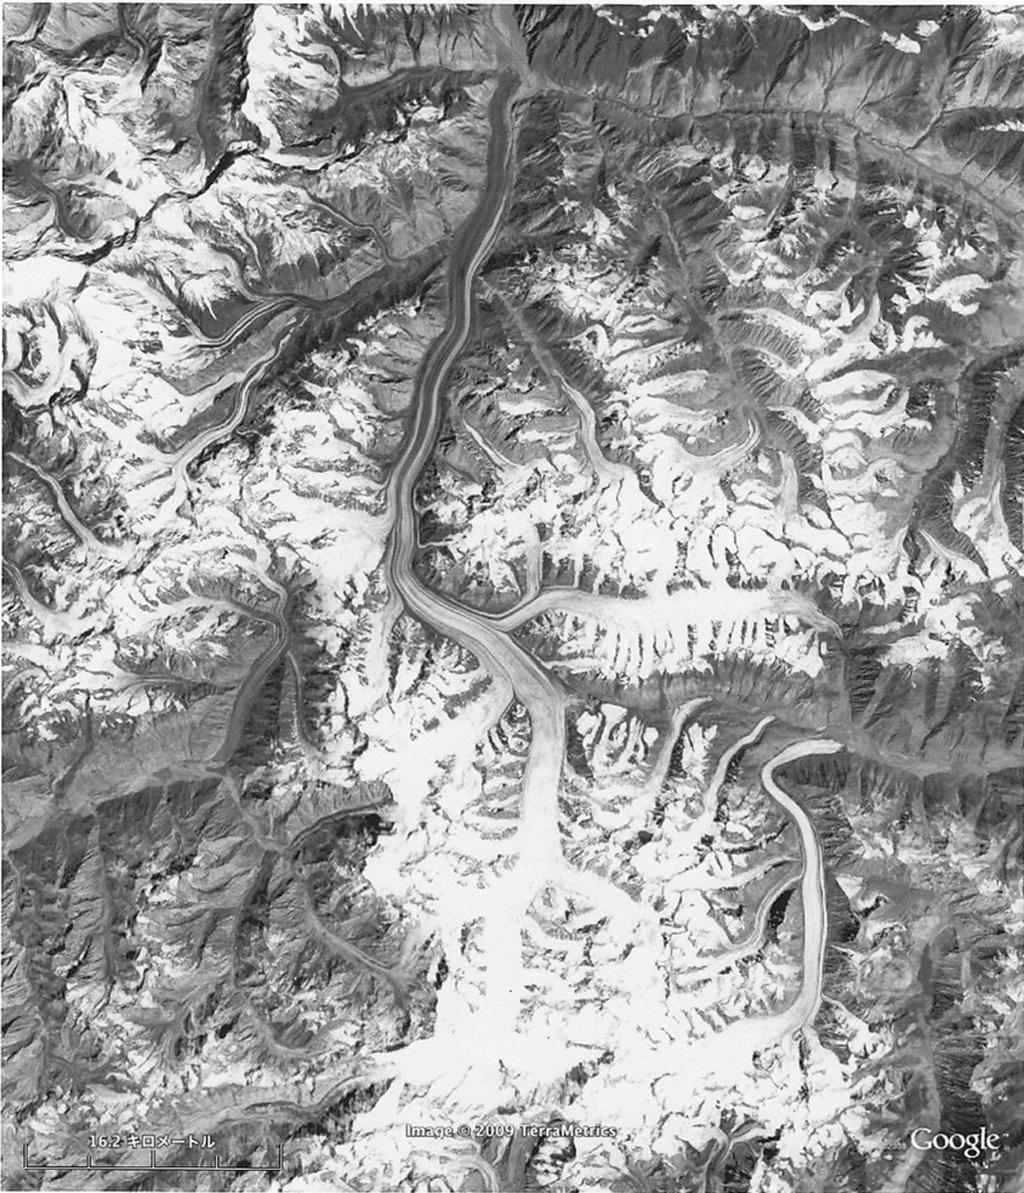 Viewed from above, the glacier shows a dendritic form, as depicted in Fig. 3-1. It is classiﬁed as a compound basins glacier under the IHD classiﬁcation scheme (UNESCO/IASH, 1970). Fig.3-1 Fedchenko Glacier and the basin.